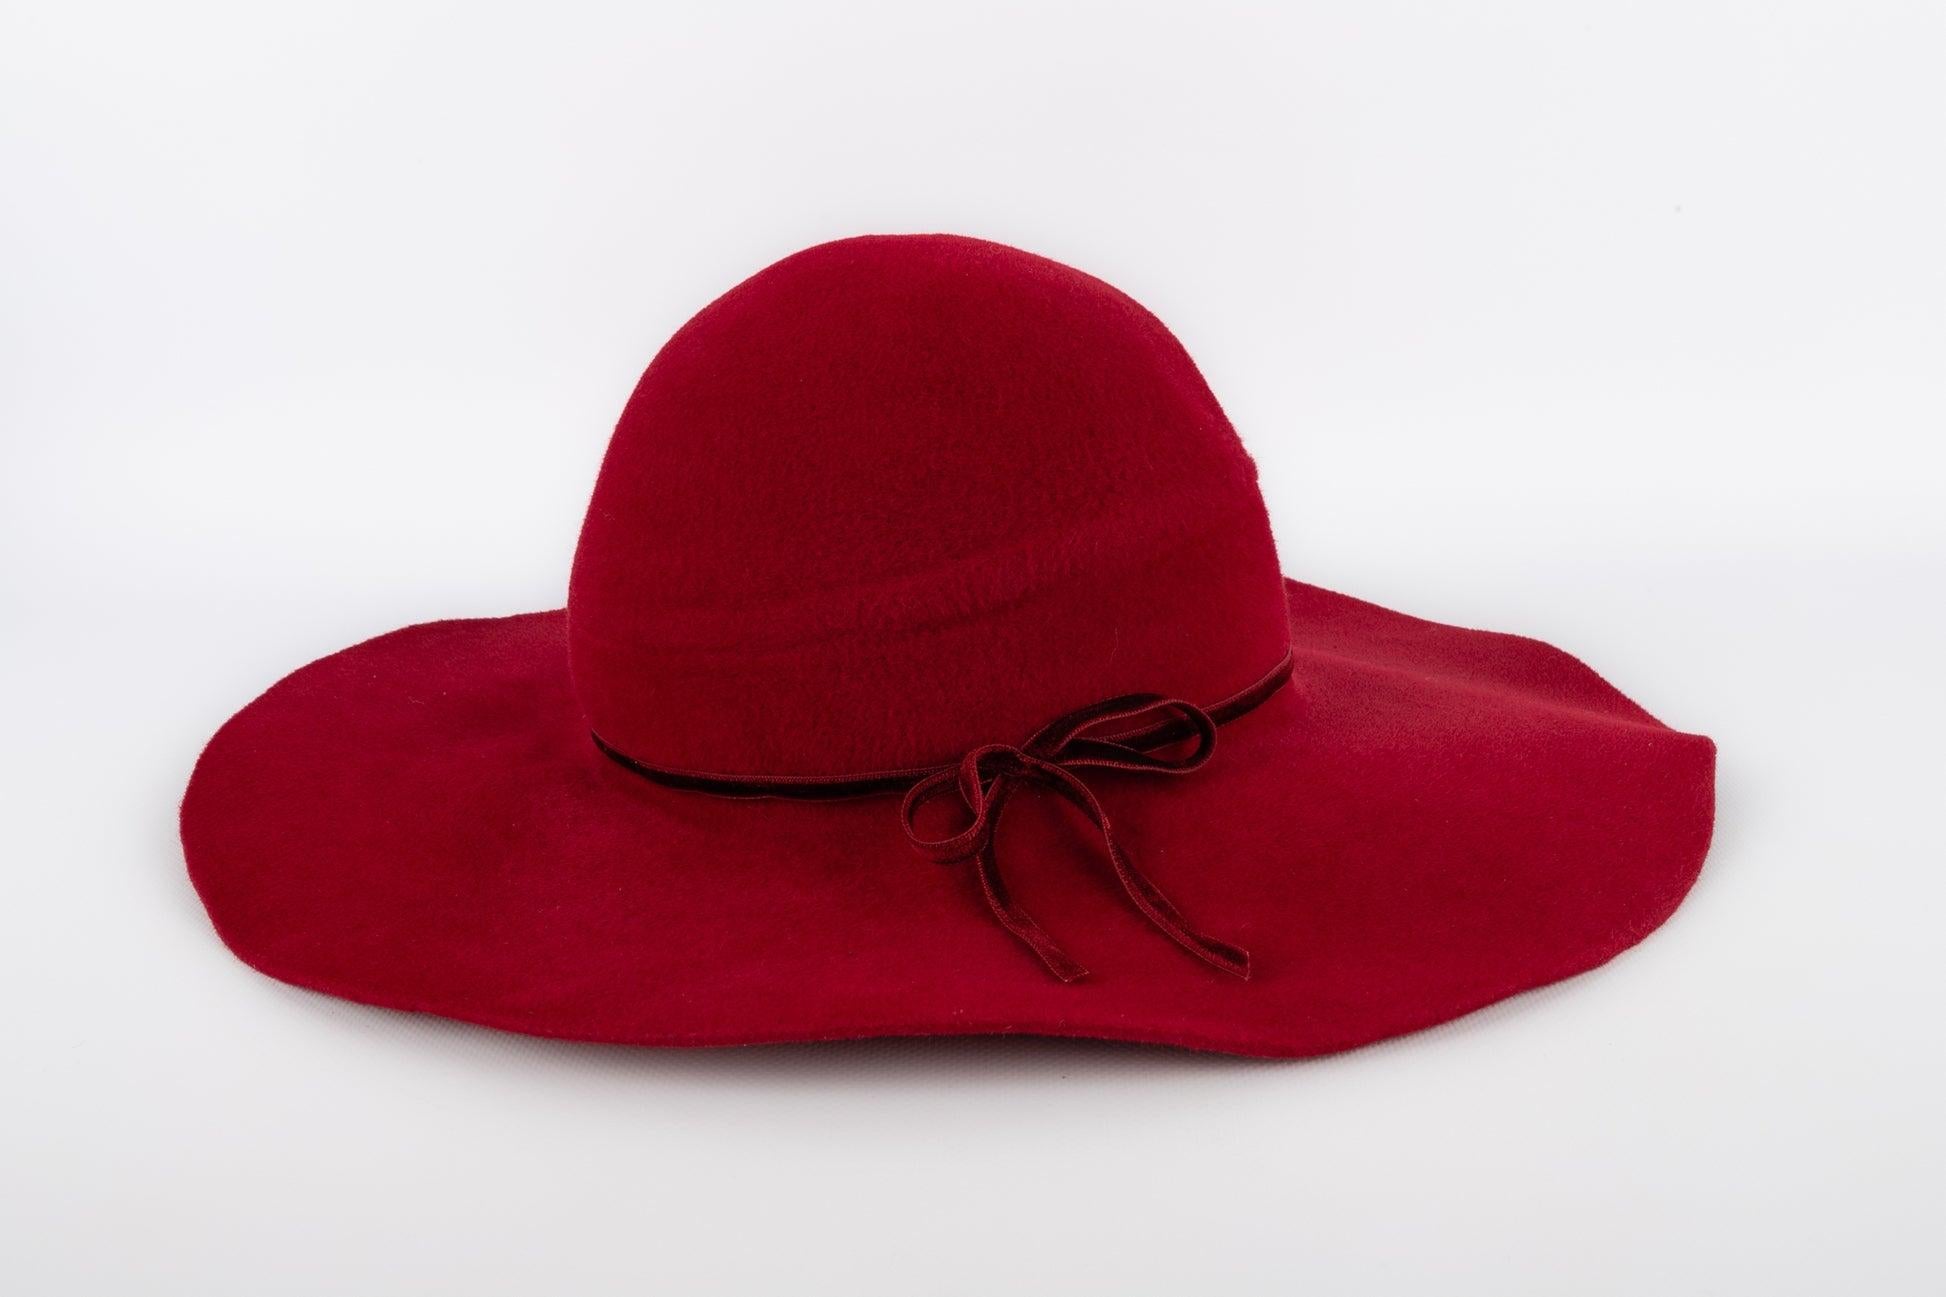 Marie Mercié - (Made in France) Red felt hat.

Additional information: 
Condition: Good condition
Dimensions: Head circumference: 55 cm

Seller Reference: CHP25